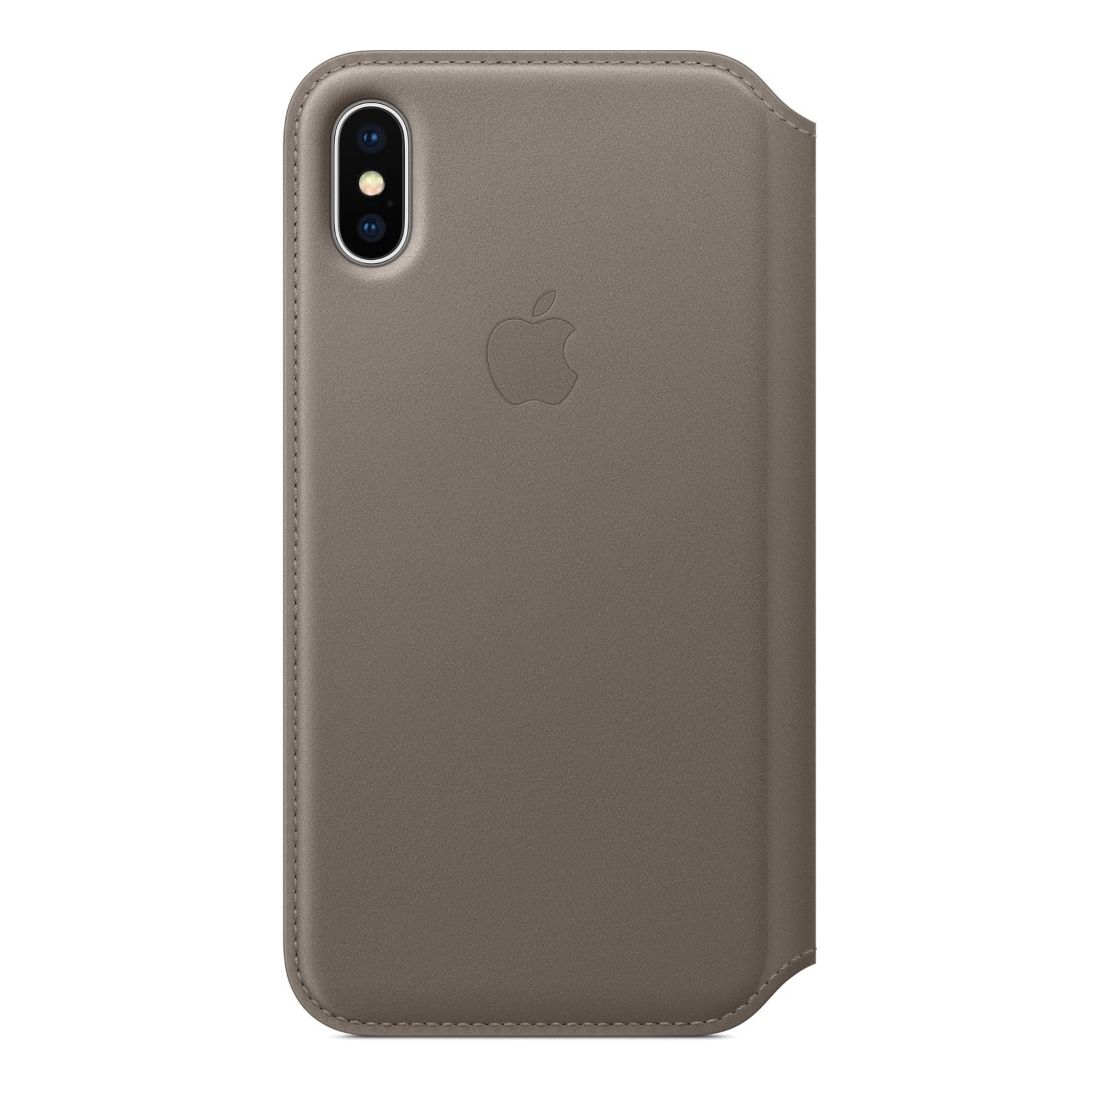 Apple Leather Folio Case Taupe for iPhone X